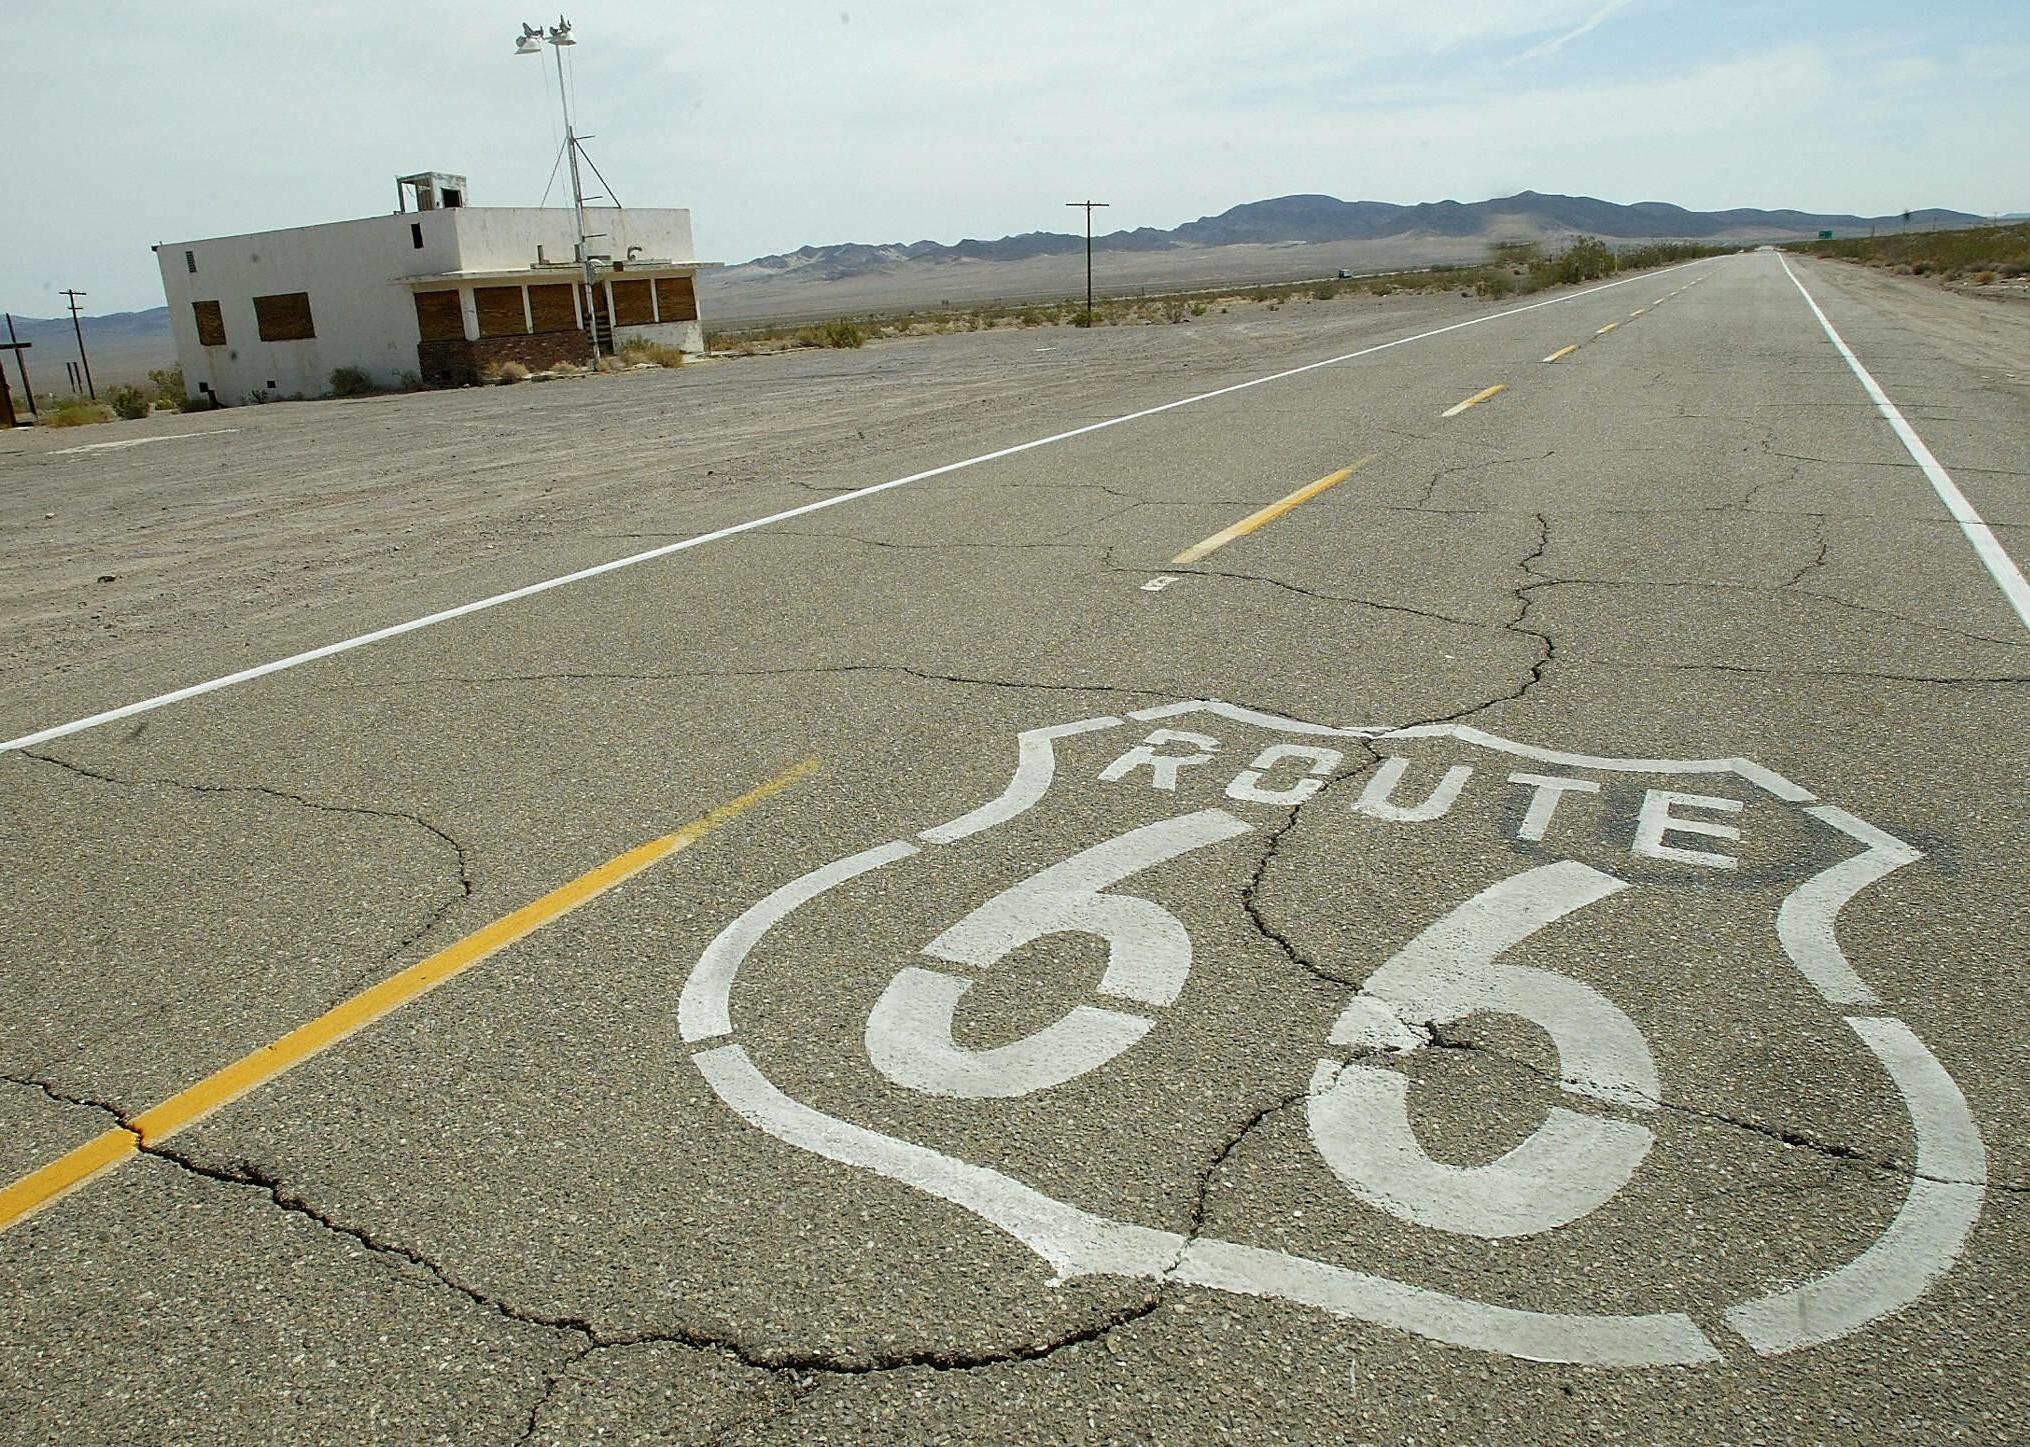 <p>Stretching from Chicago to Los Angeles, Route 66 was once one of America's busiest highways. Today, sections of the road are all but obsolete, utilized primarily by nostalgia-minded tourists.</p>